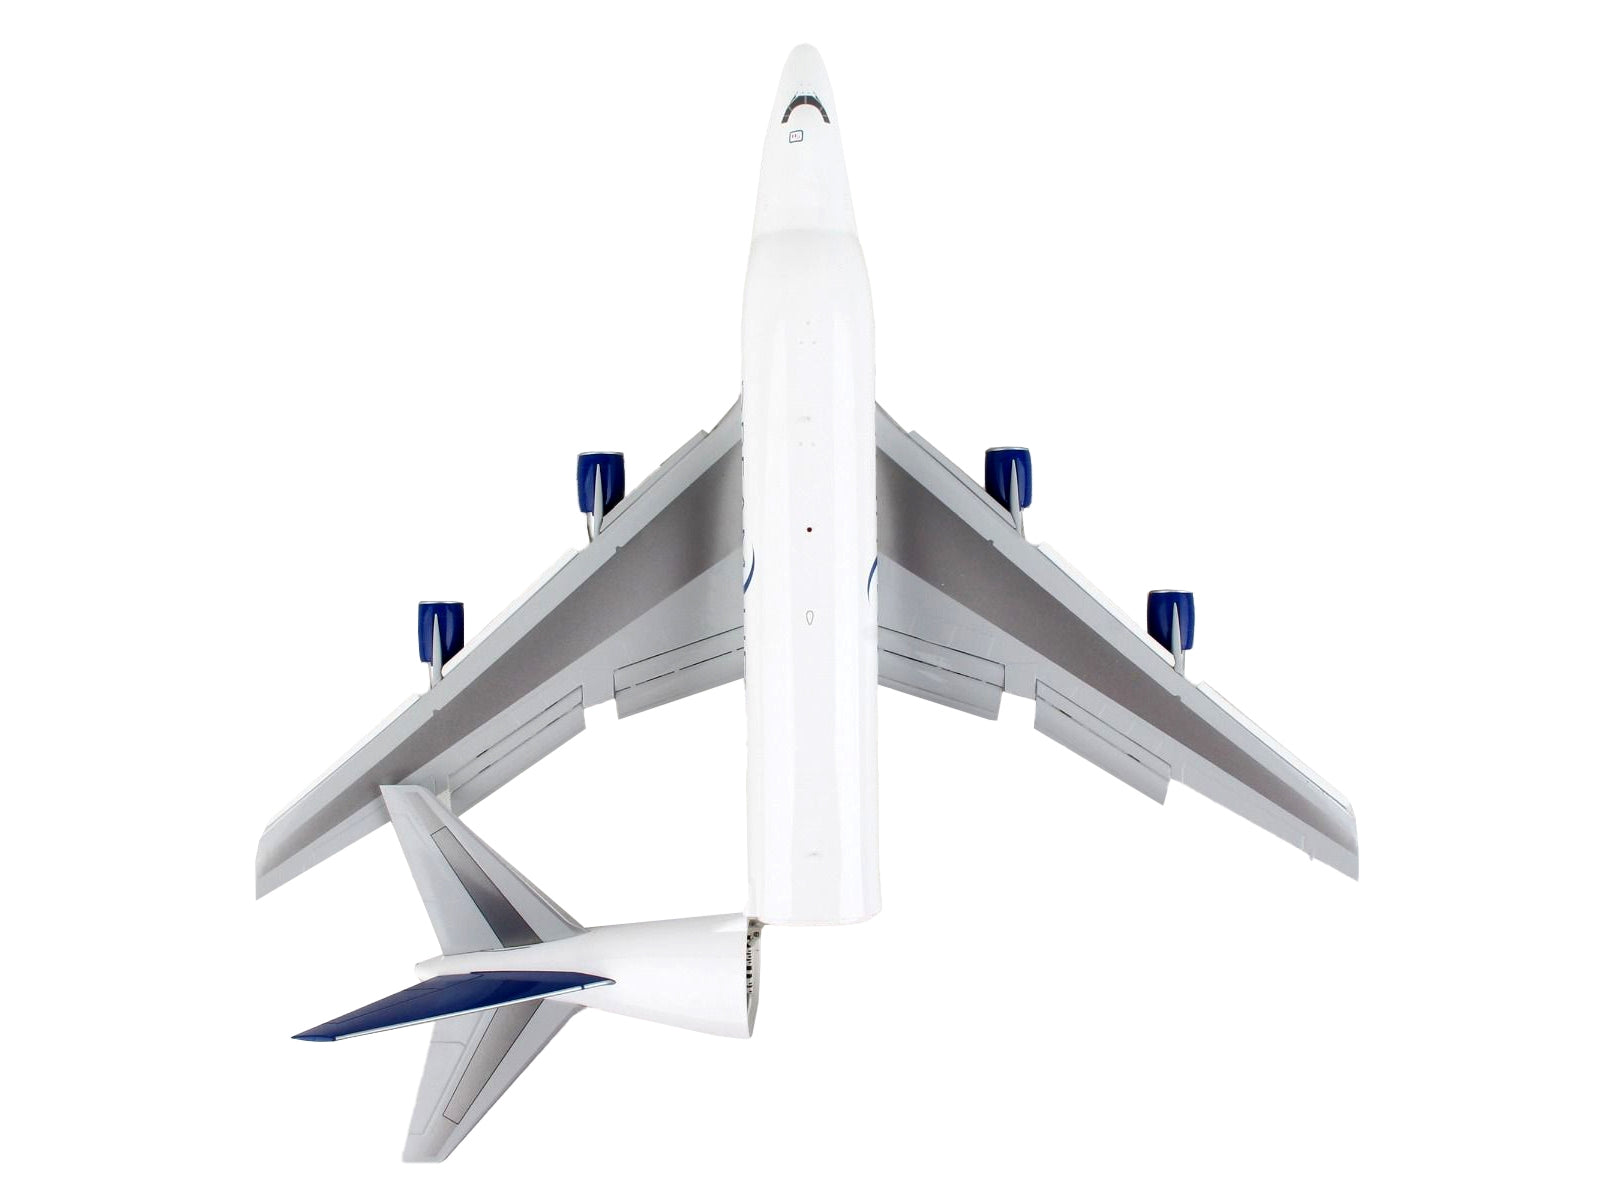 Boeing 747LCF Commercial Aircraft with Flaps Down "Dreamlifter" White with Blue Tail "Gemini 200" Series 1/200 Diecast Model Airplane by GeminiJets